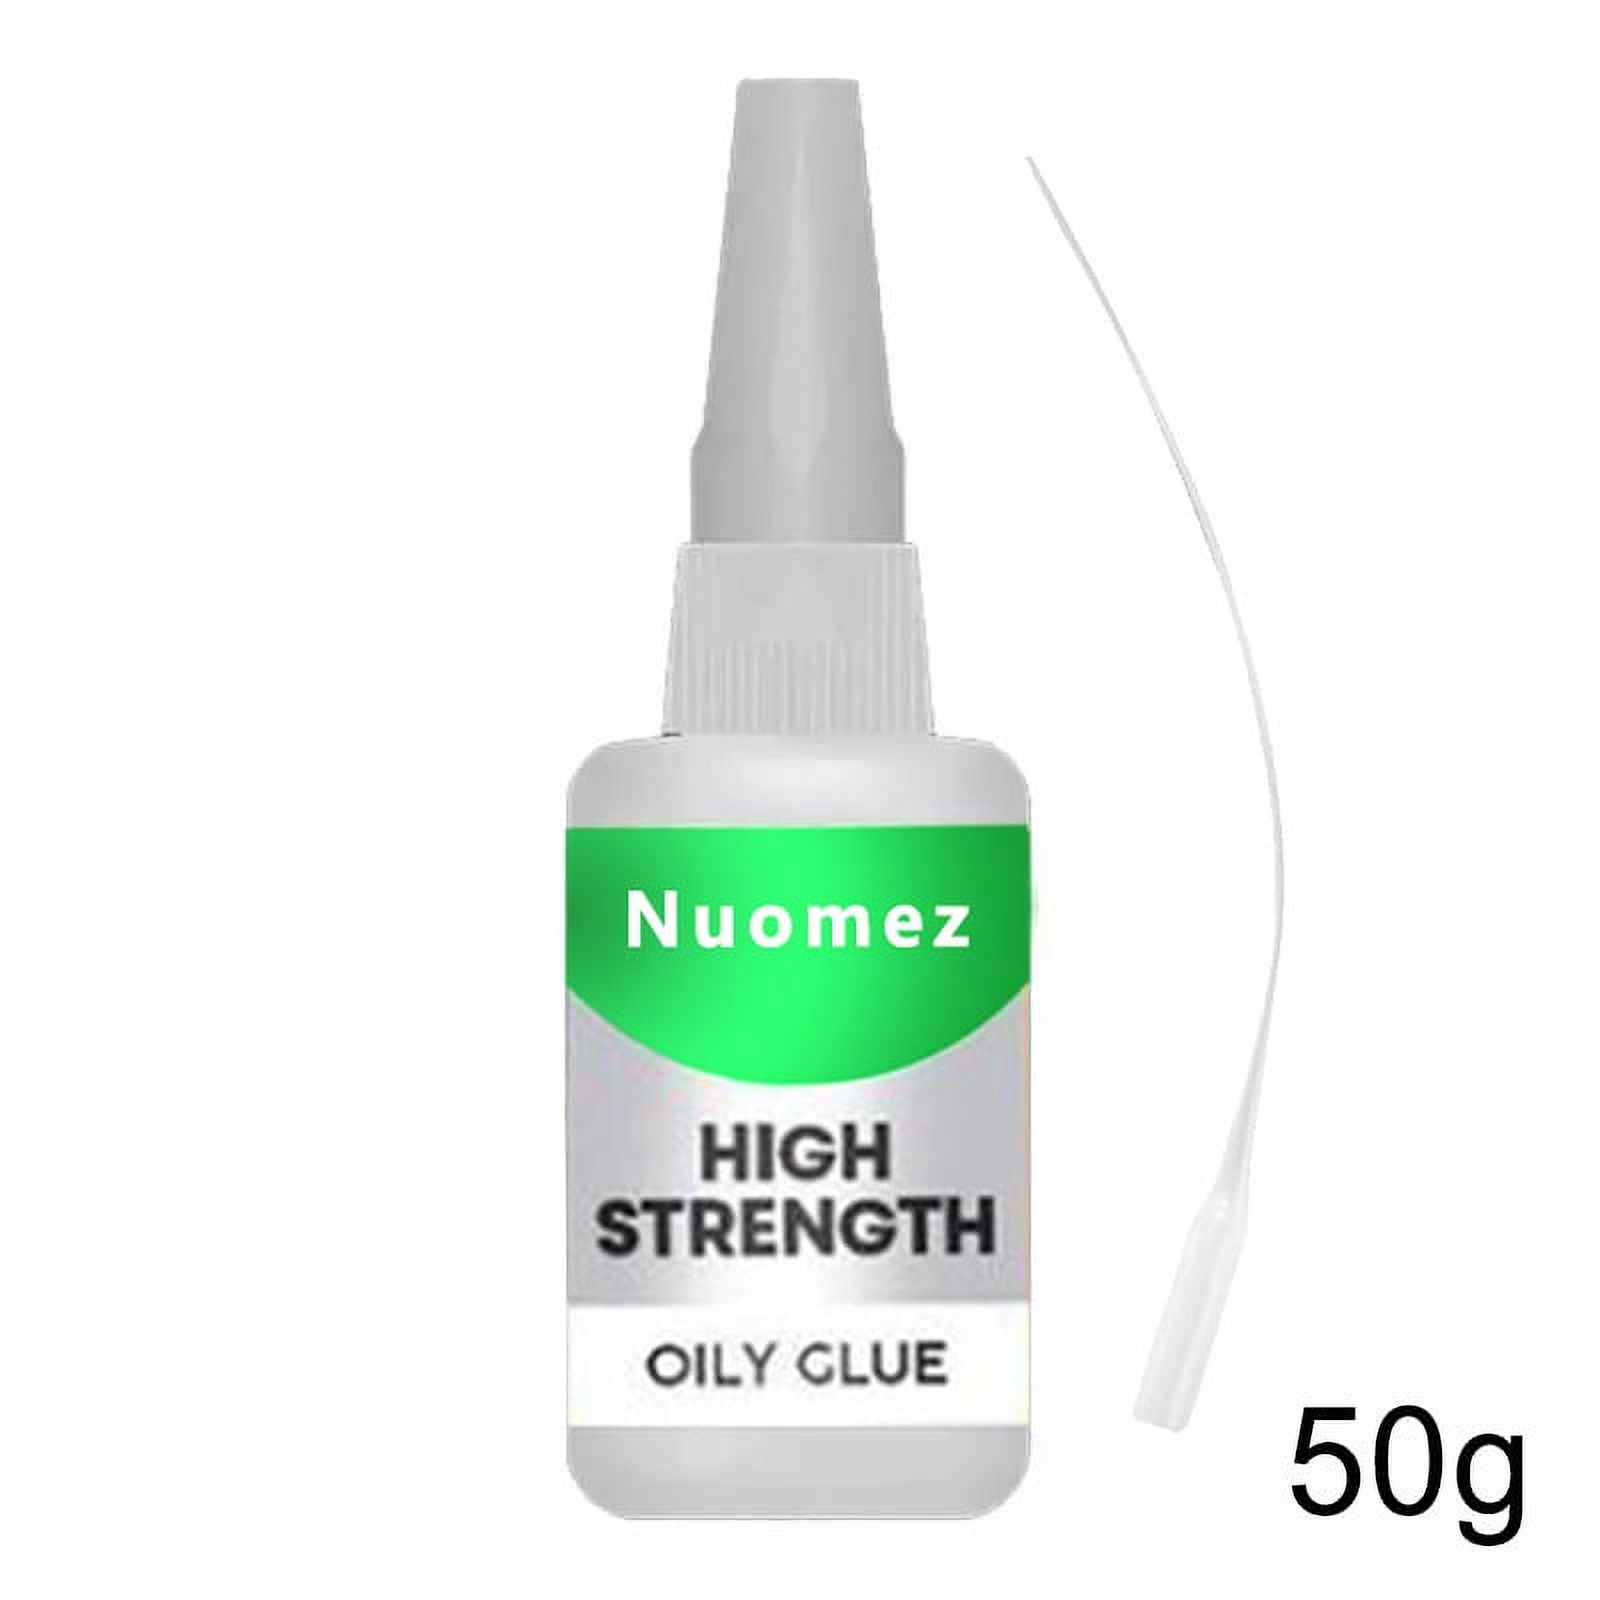 Welding High-Strength Oily Glue - Uniglue Universal Super Glue, All Purpose  Super Glue Extra Strength, Waterproof Strong Glue for Plastic Wood Ceramics  Metal, Dry Only in 10s (2PC-100g) 